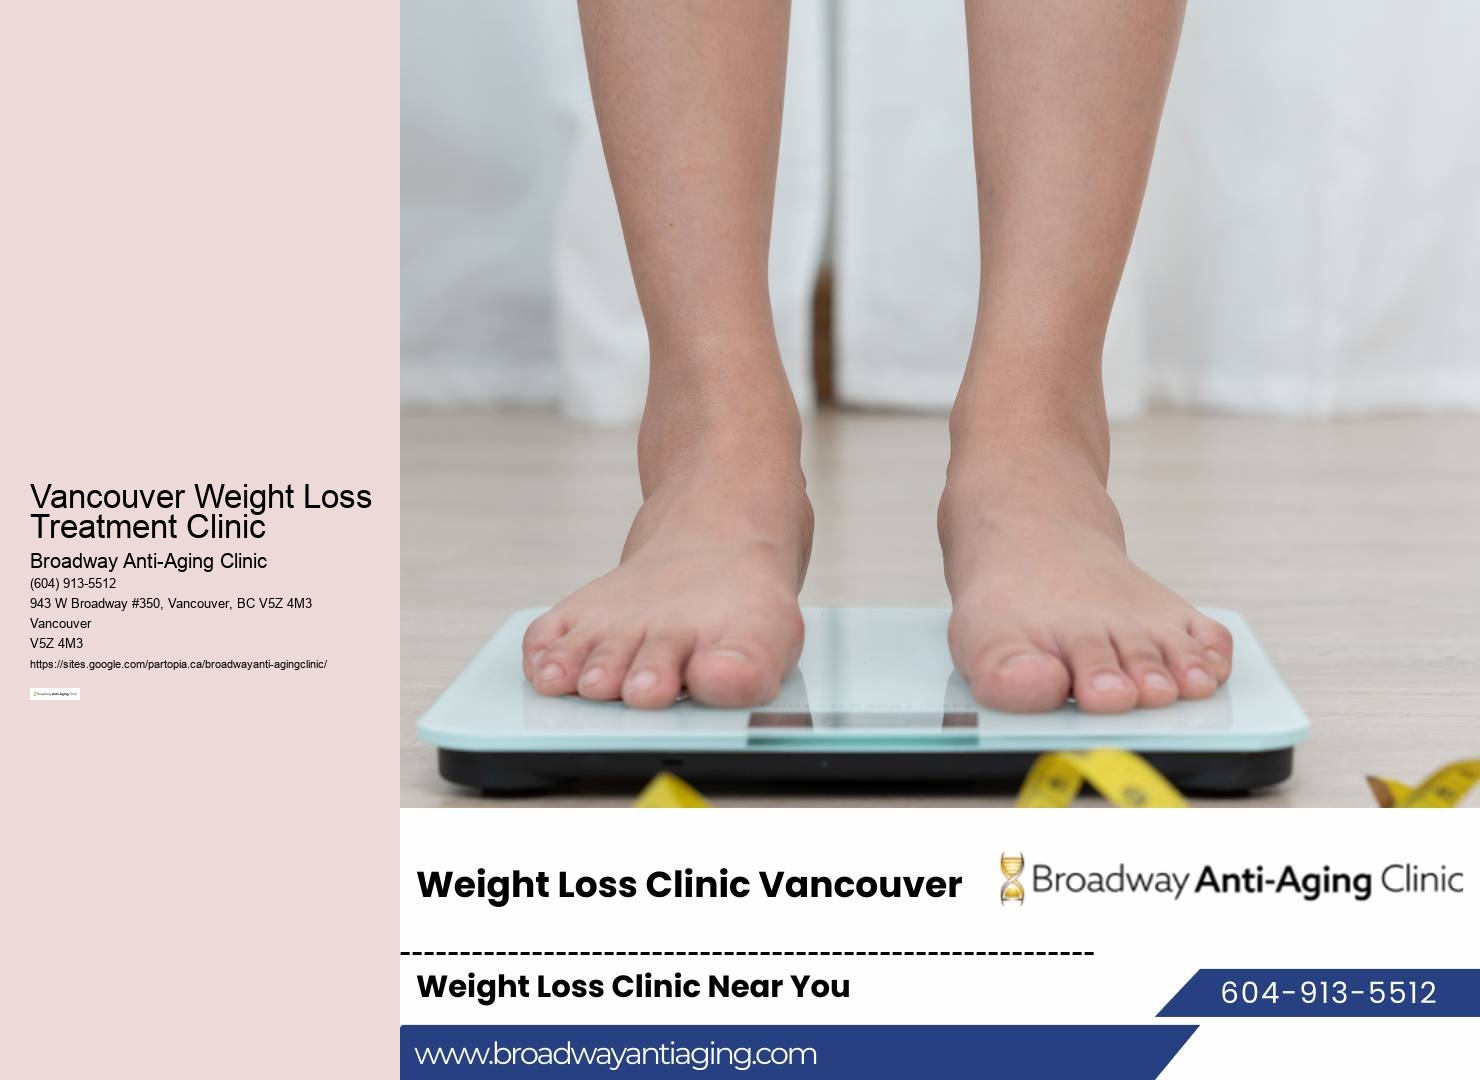 Weight loss clinic prices Vancouver